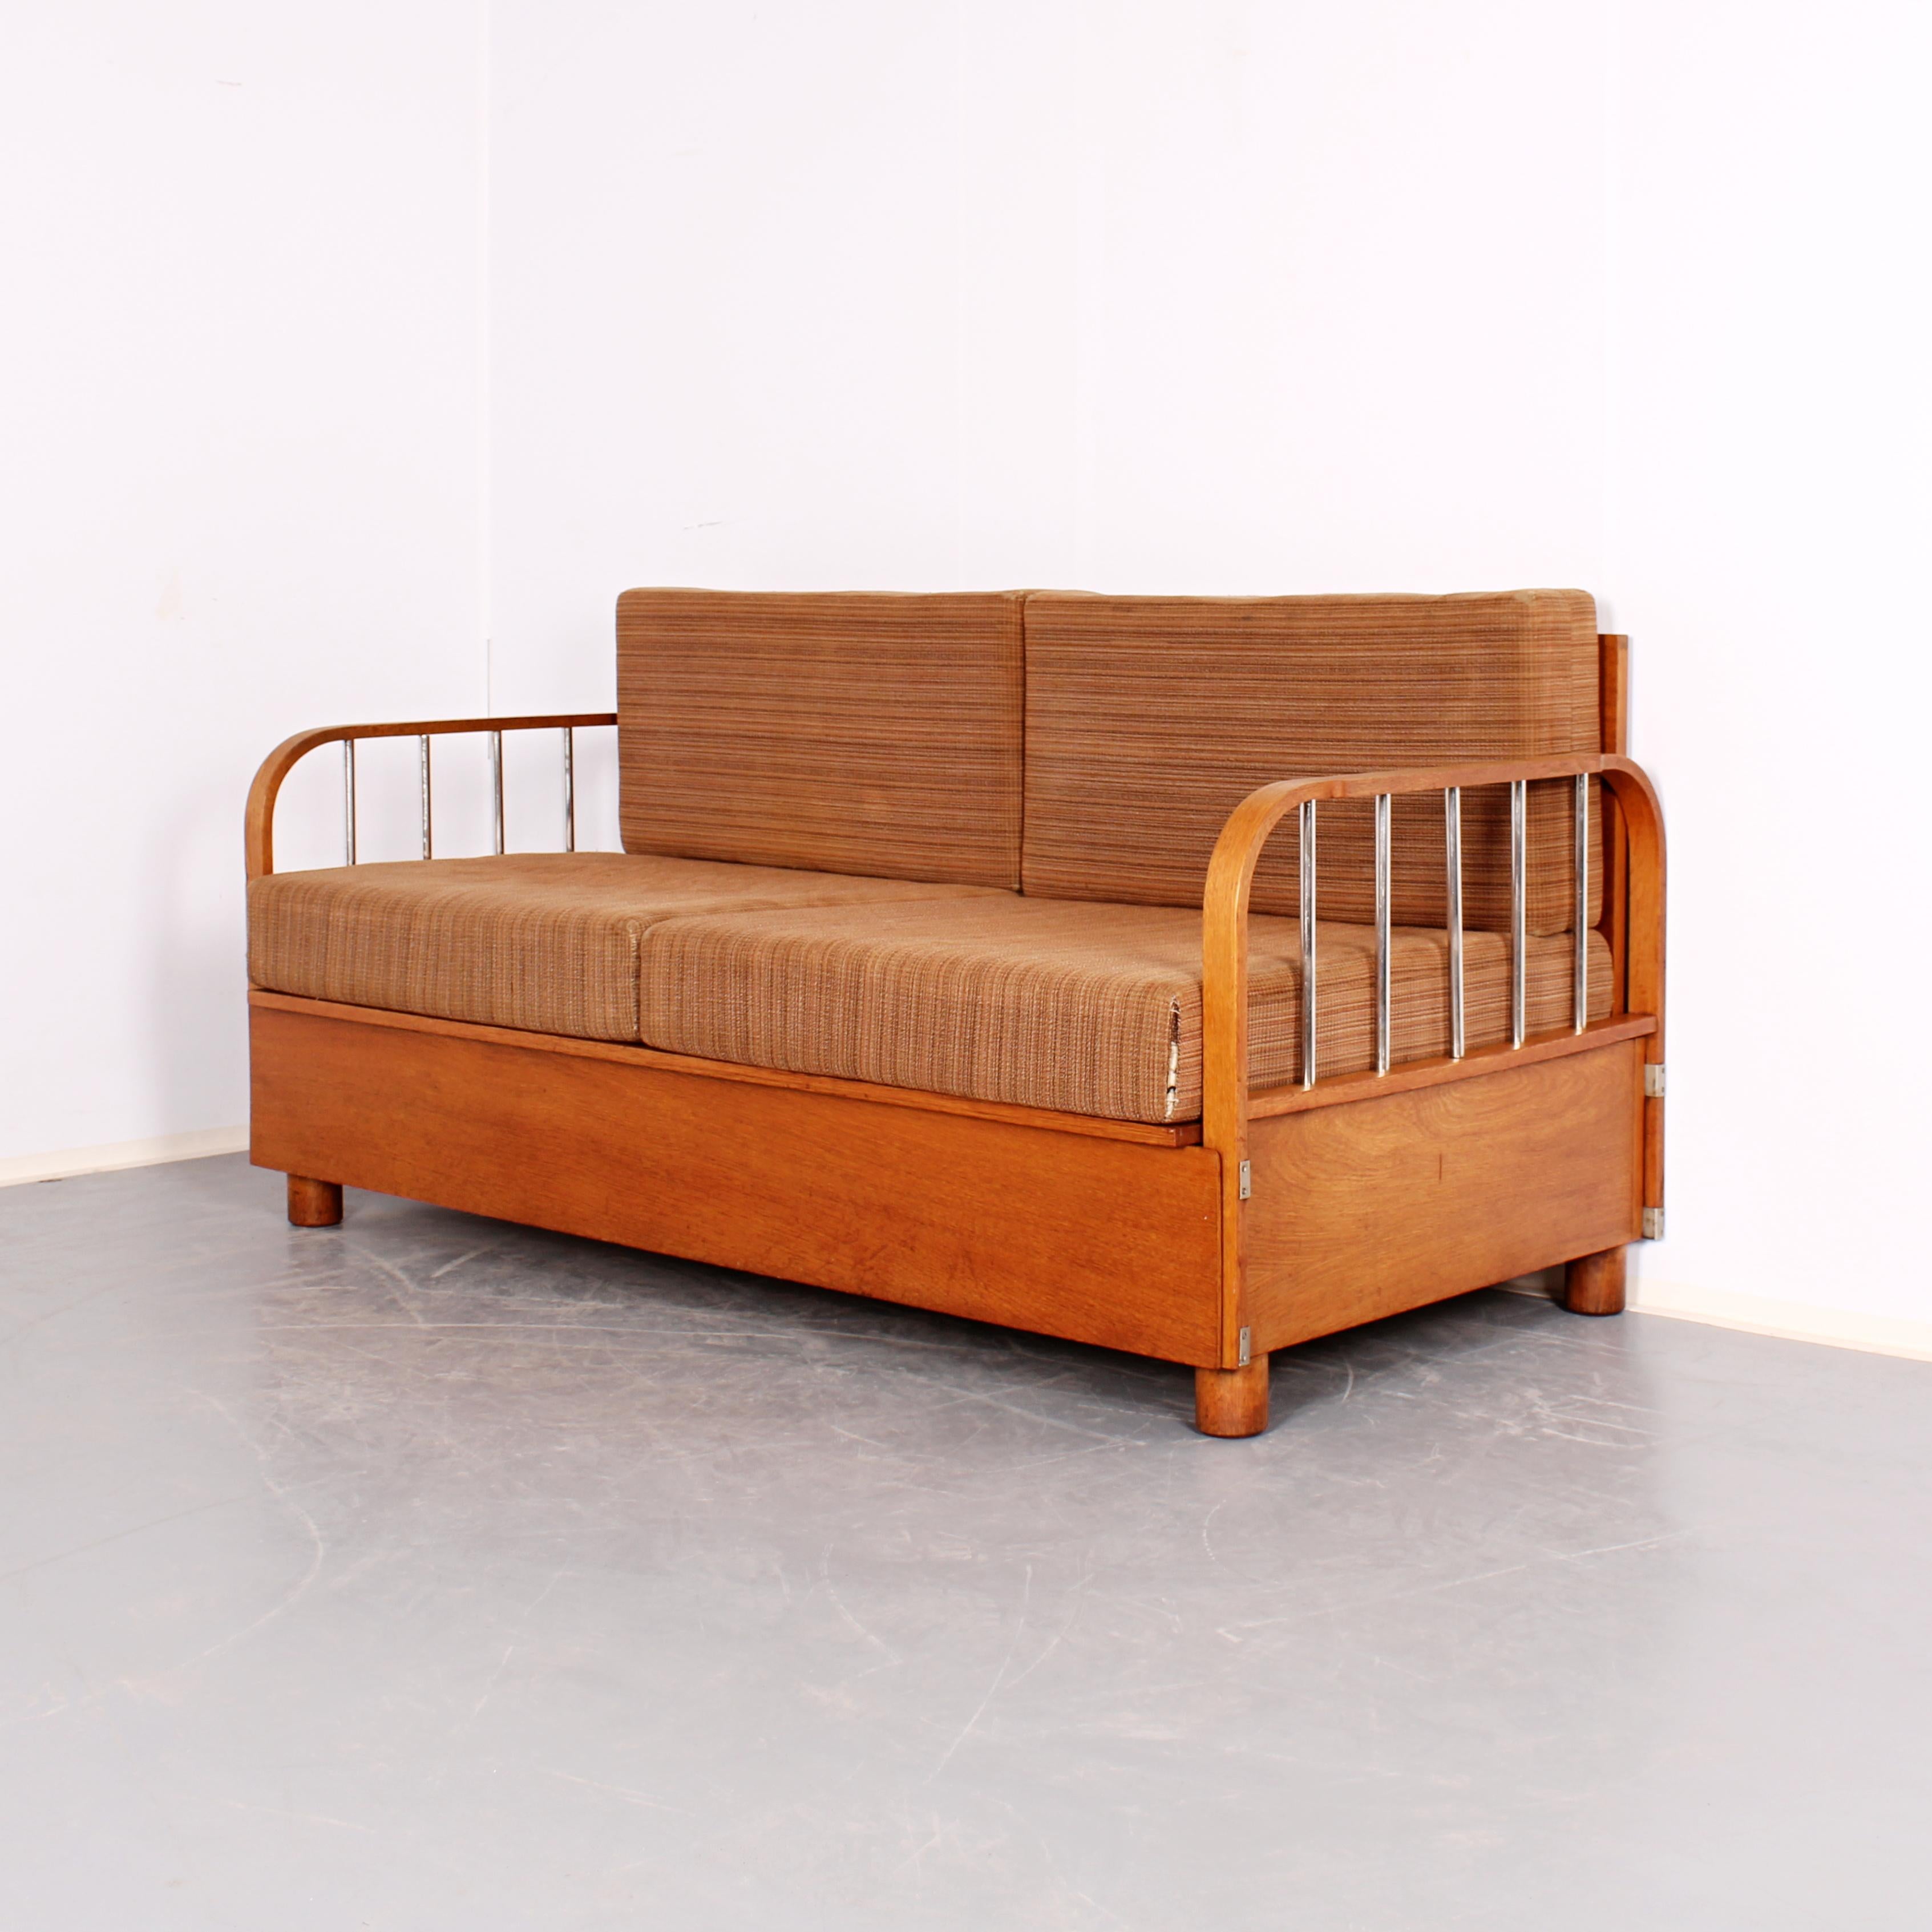 This functionalist sofa (model No. H-215) was designed by the eminent architect Jindrich Halabala for furniture comapny UP Zavody. The sofa was manufactured in the 1930, and is a lovely example of prewar Czechoslovak functionalism. The structure is